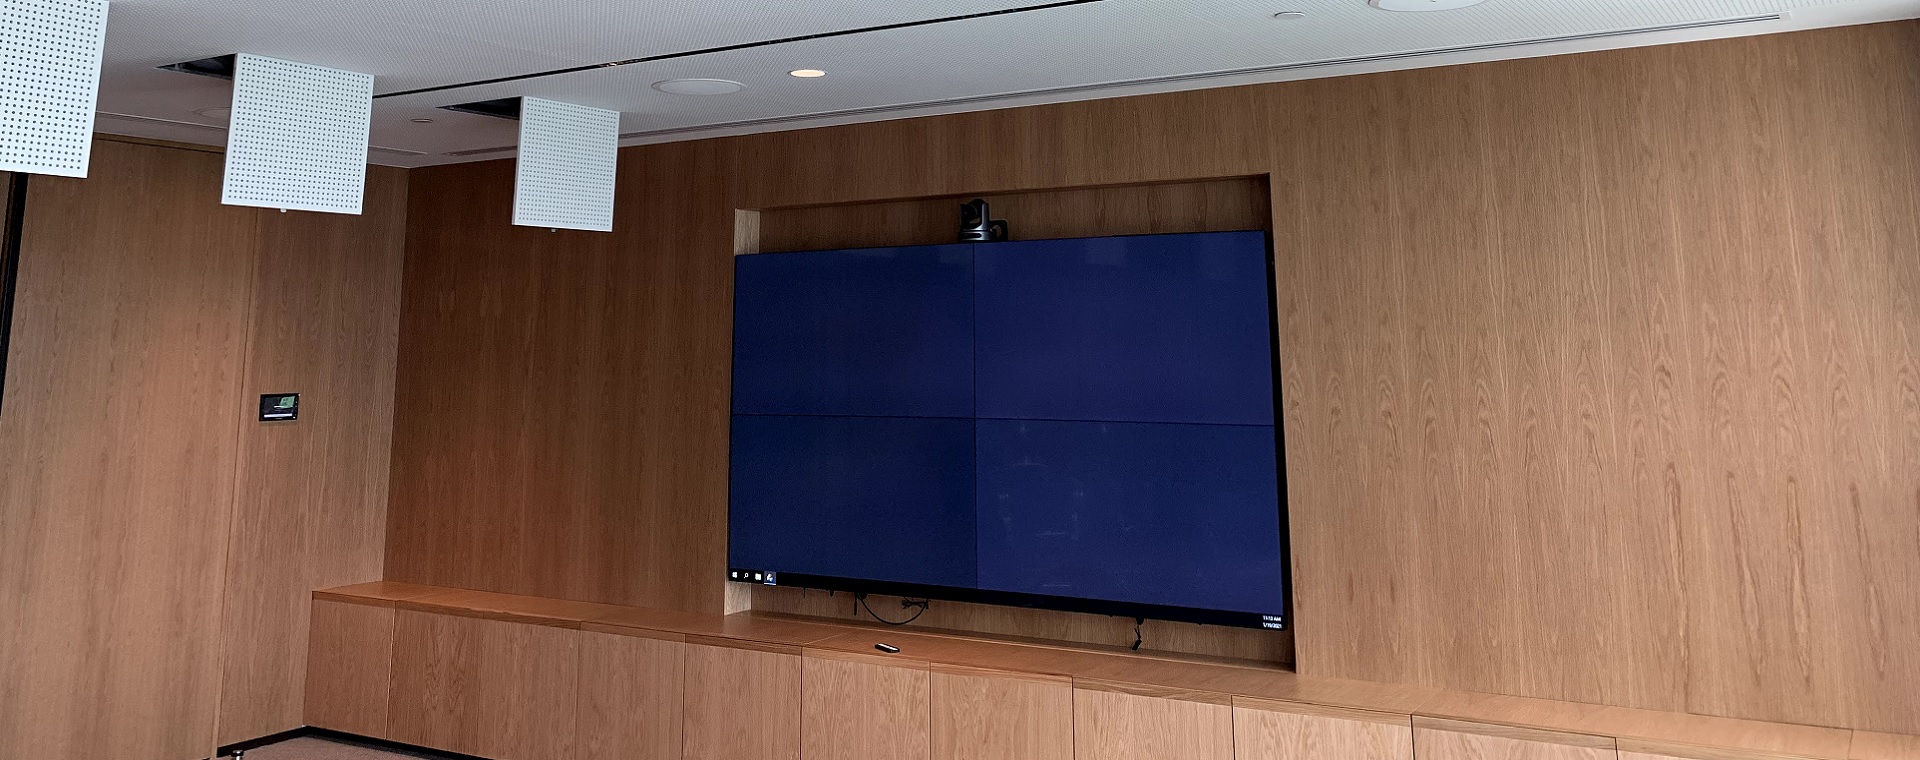 2x2 recessed video wall at Colliers offices